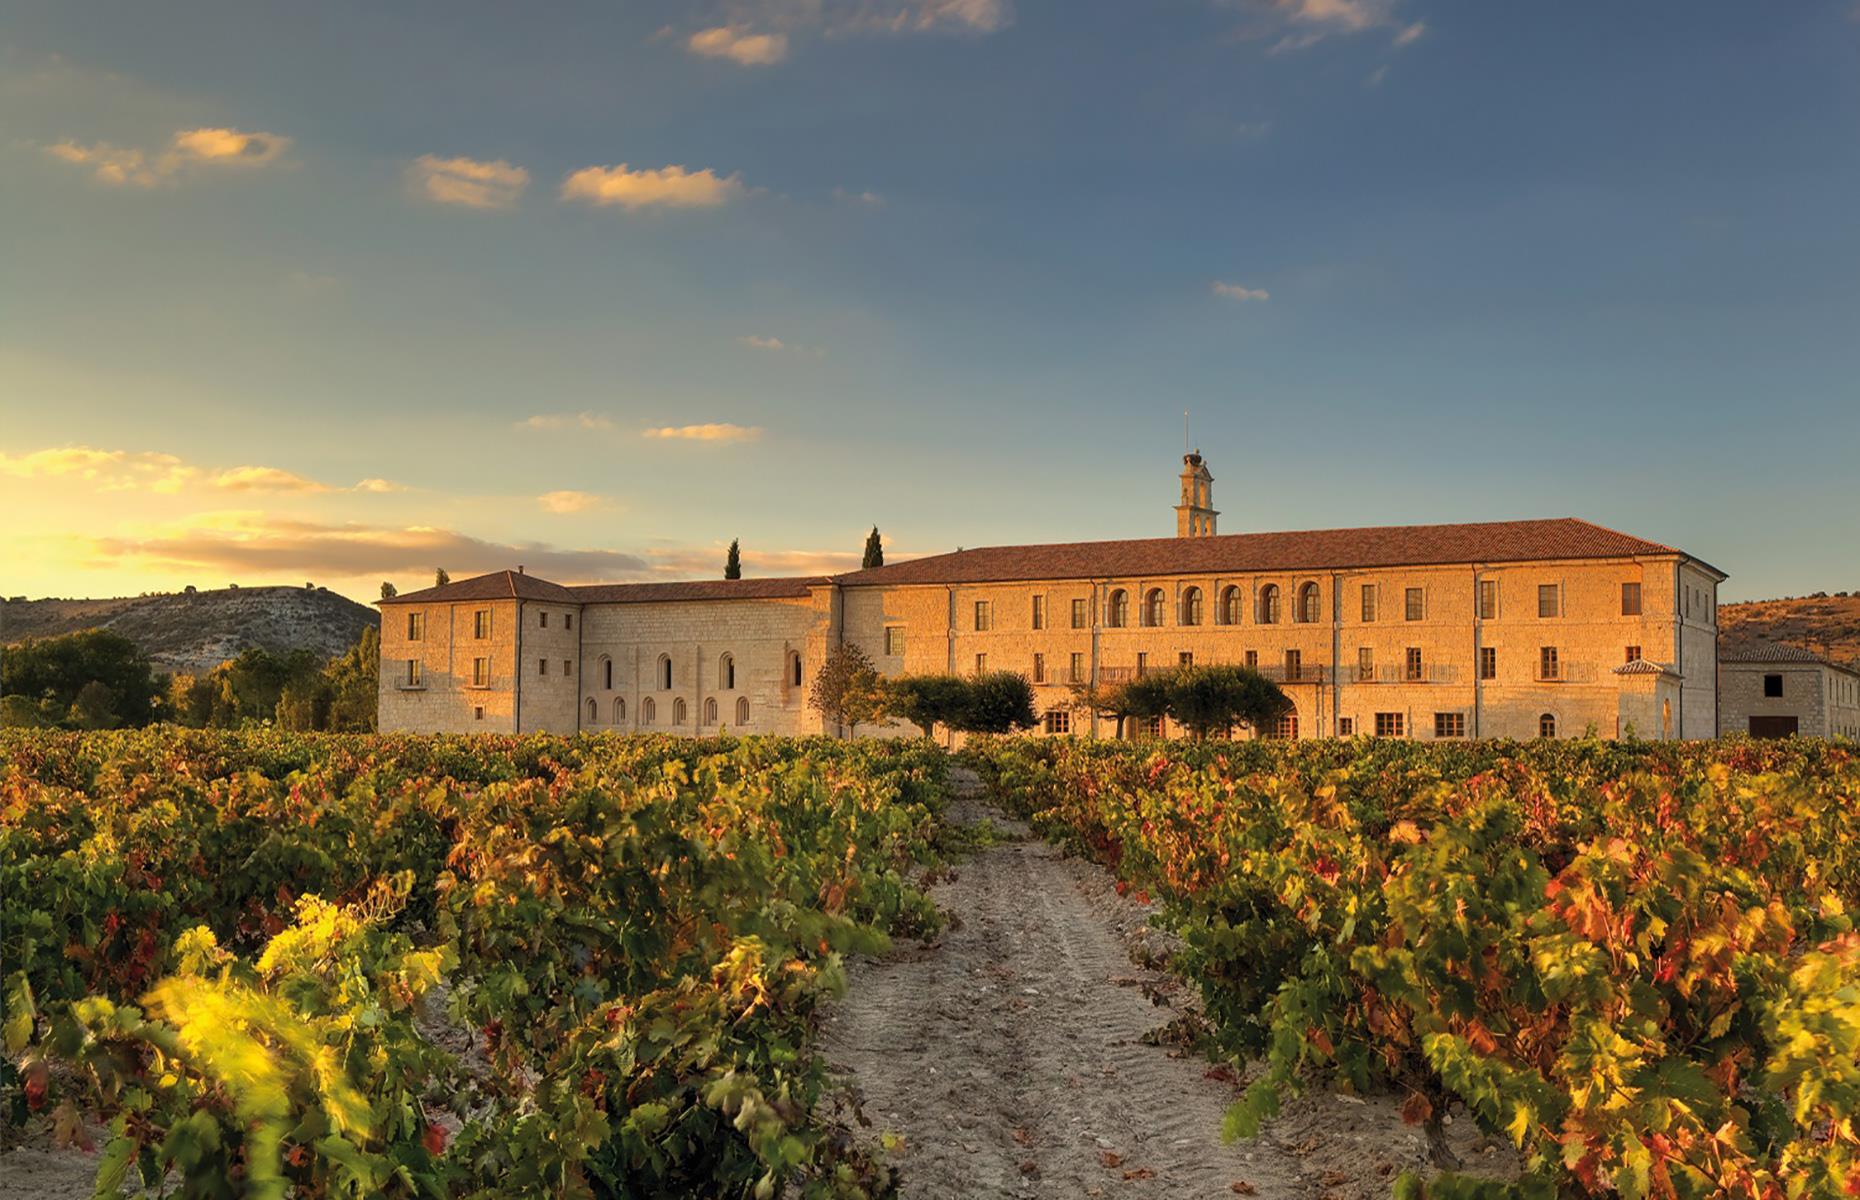 <p>If you're into wine, the owners of <a href="https://www.booking.com/hotel/es/abadia-retuerta-ledomaine.en-gb.html" rel="nofollow” target=">Abadia Retuerta LeDomaine</a> in Spain share your passion. Located in a restored 12th-century monastery and surrounded by beautiful vineyards, the hotel is all about wine. A one-night wine experience for two includes a guided wine tasting, a winery and estate tour, while the hotel's spa offers several treatments featuring local vino.</p>  <p><strong><a href="https://www.loveexploring.com/gallerylist/68174/time-warp-travel-the-worlds-eeriest-abandoned-hotels-and-airports">Time warp travel: the world's eeriest abandoned hotels and airports</a></strong></p>